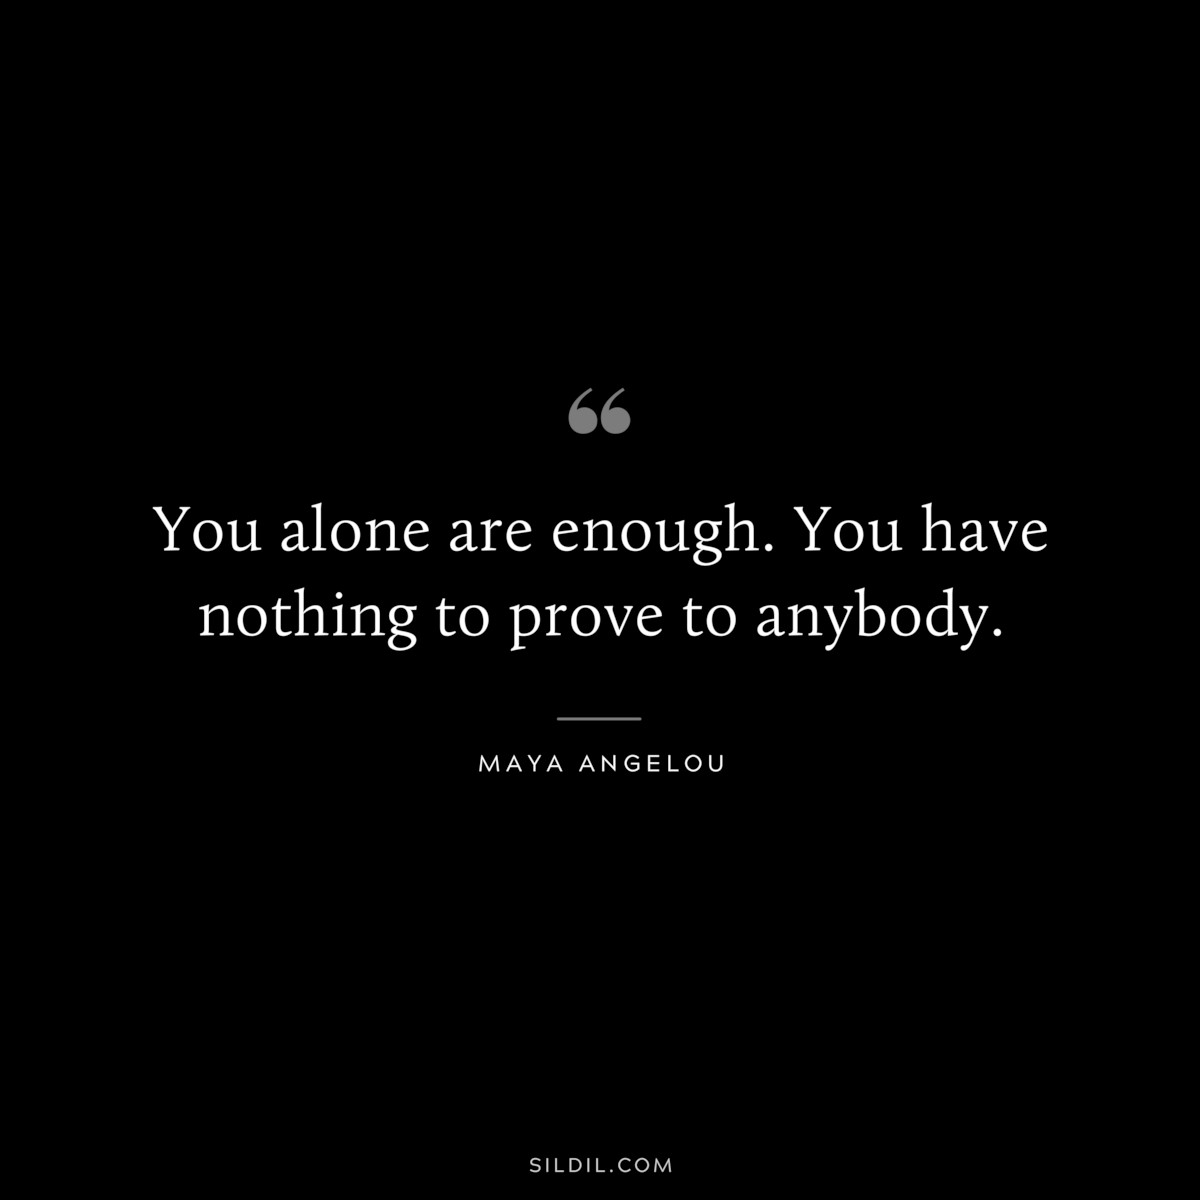 You alone are enough. You have nothing to prove to anybody. ― Maya Angelou